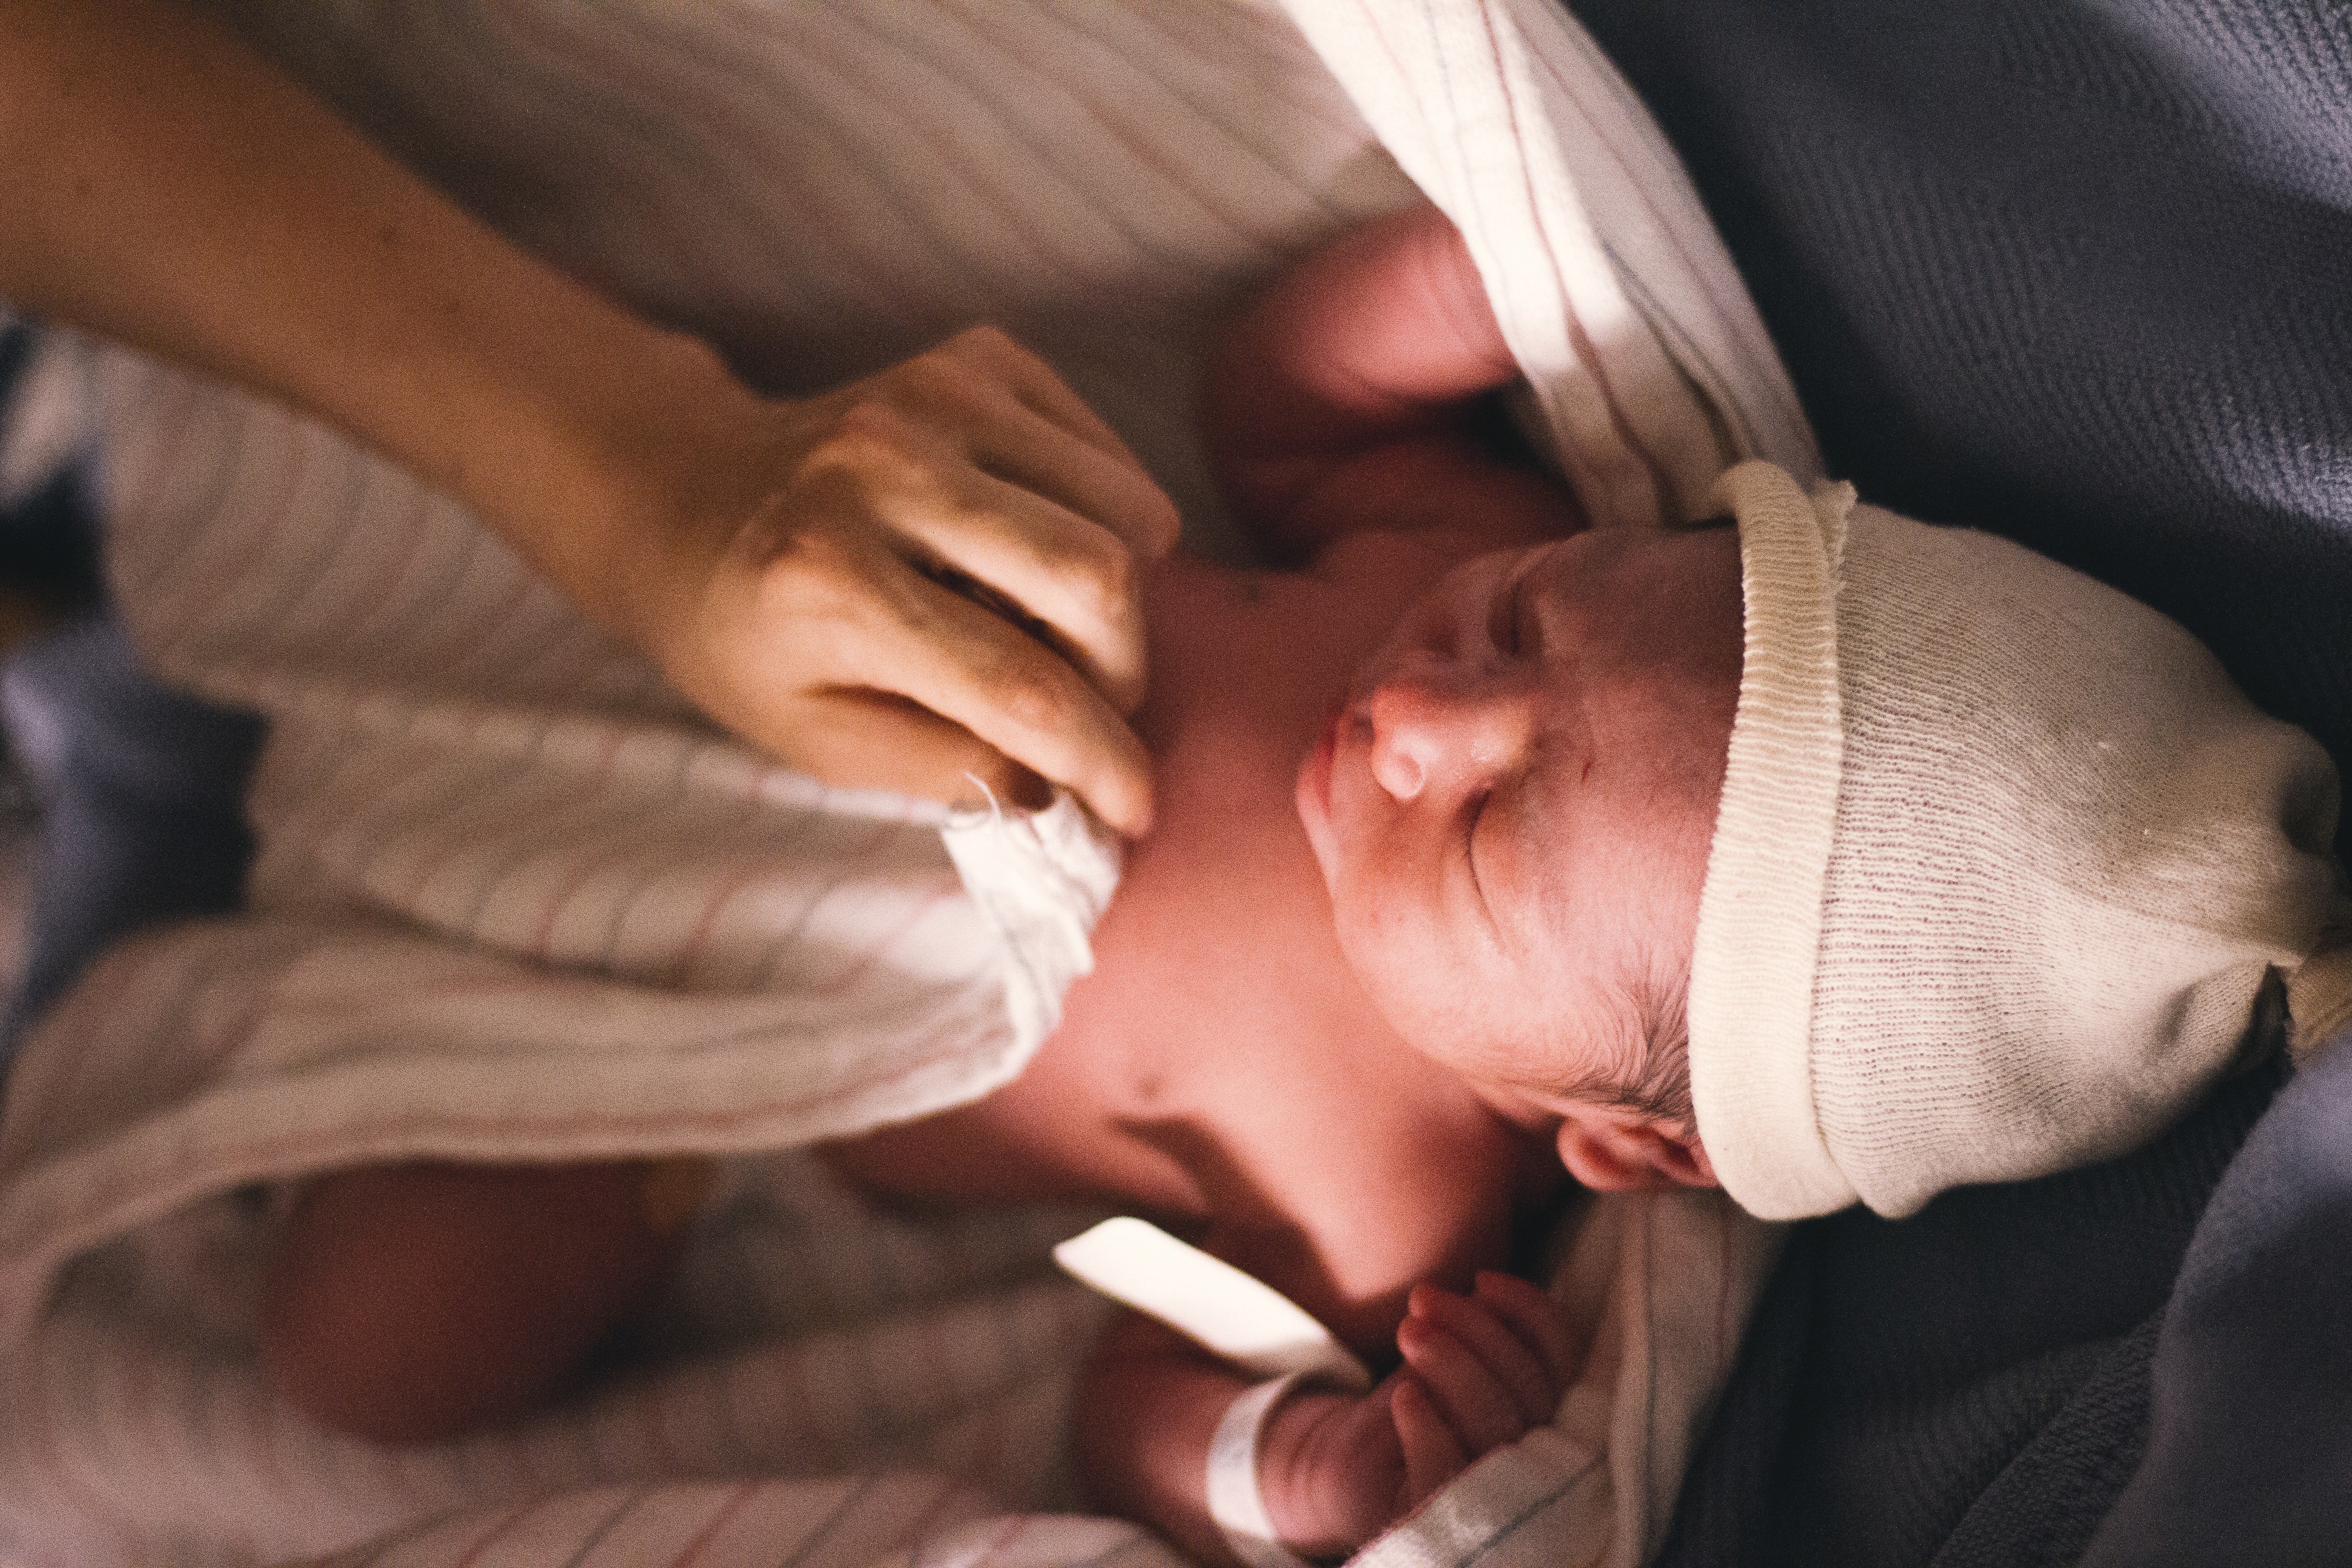 Newborn baby being wrapped. | Source: Isaac Taylor/Pexels